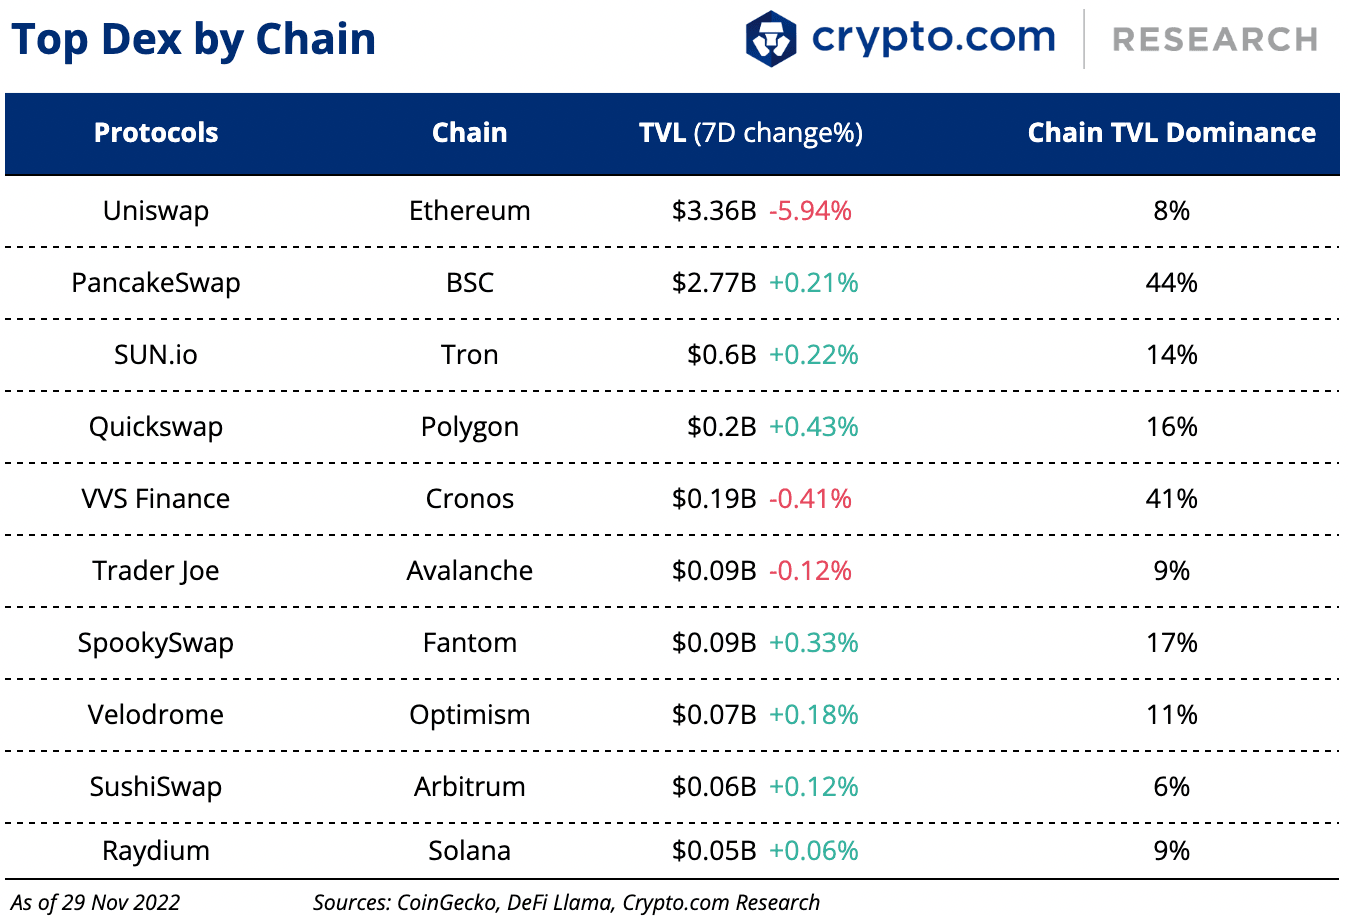 Top DEX by Chain